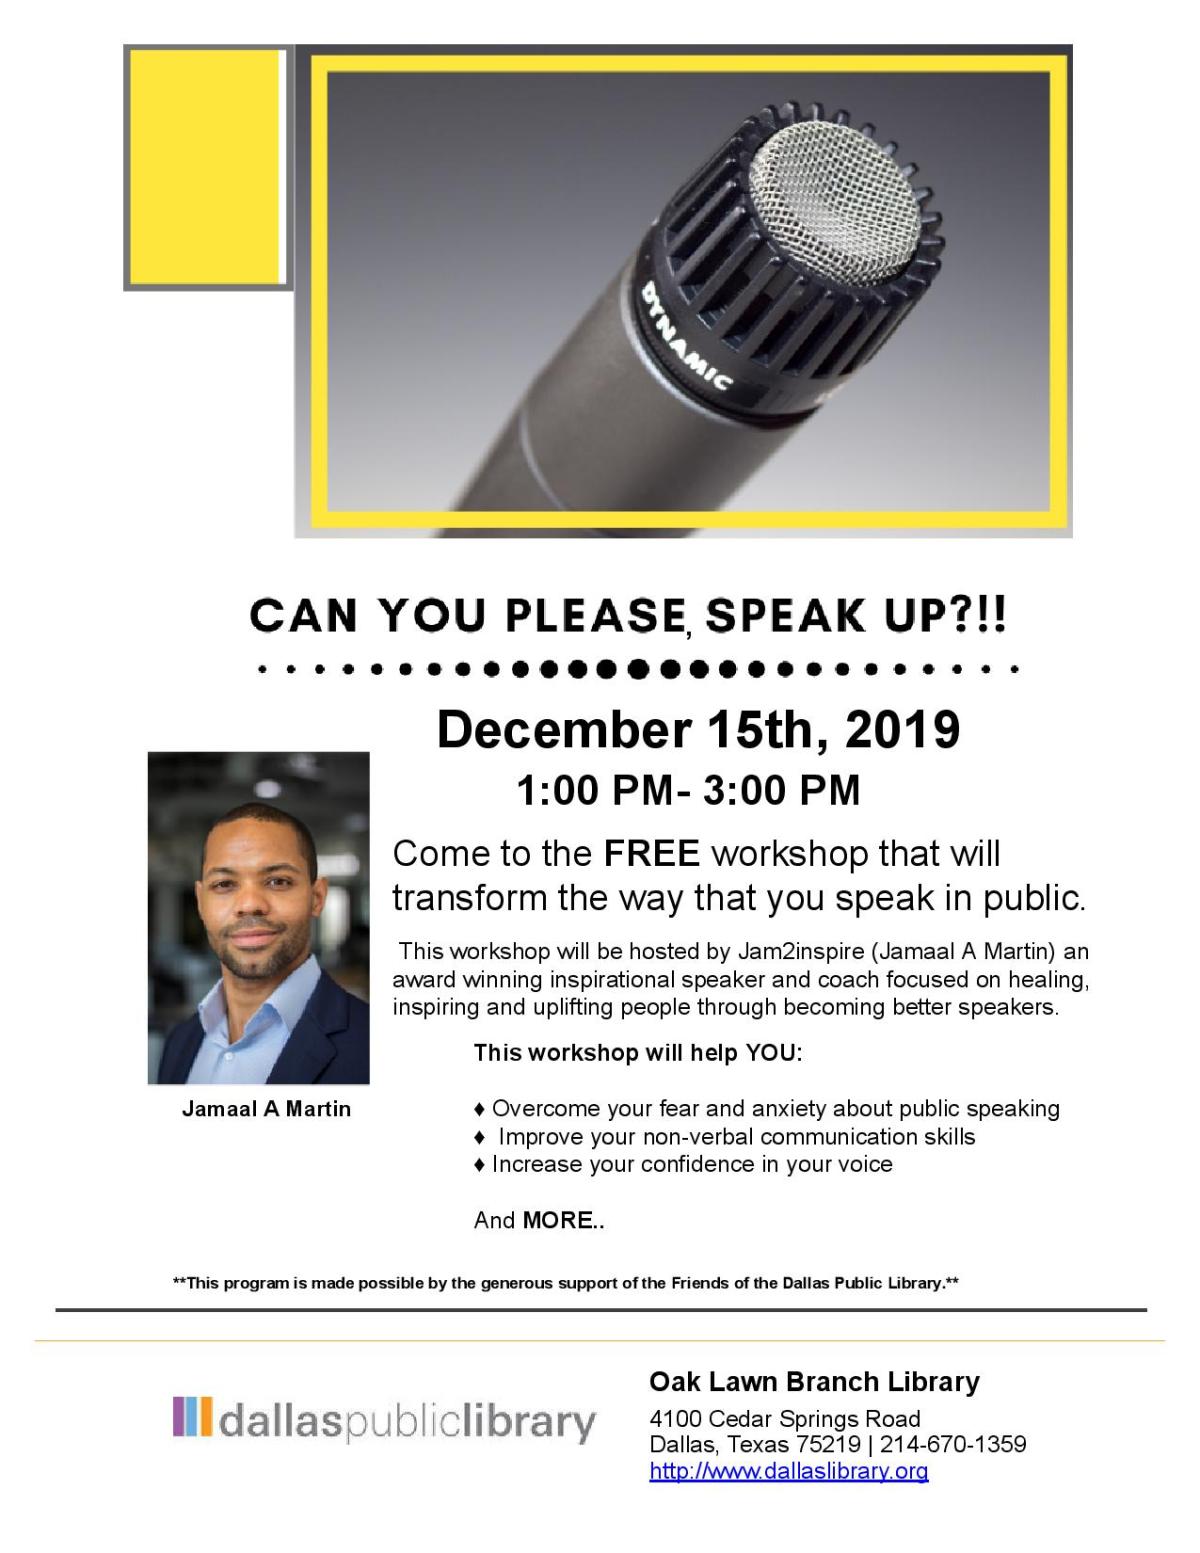 Can You Please, Speak Up? Flyer